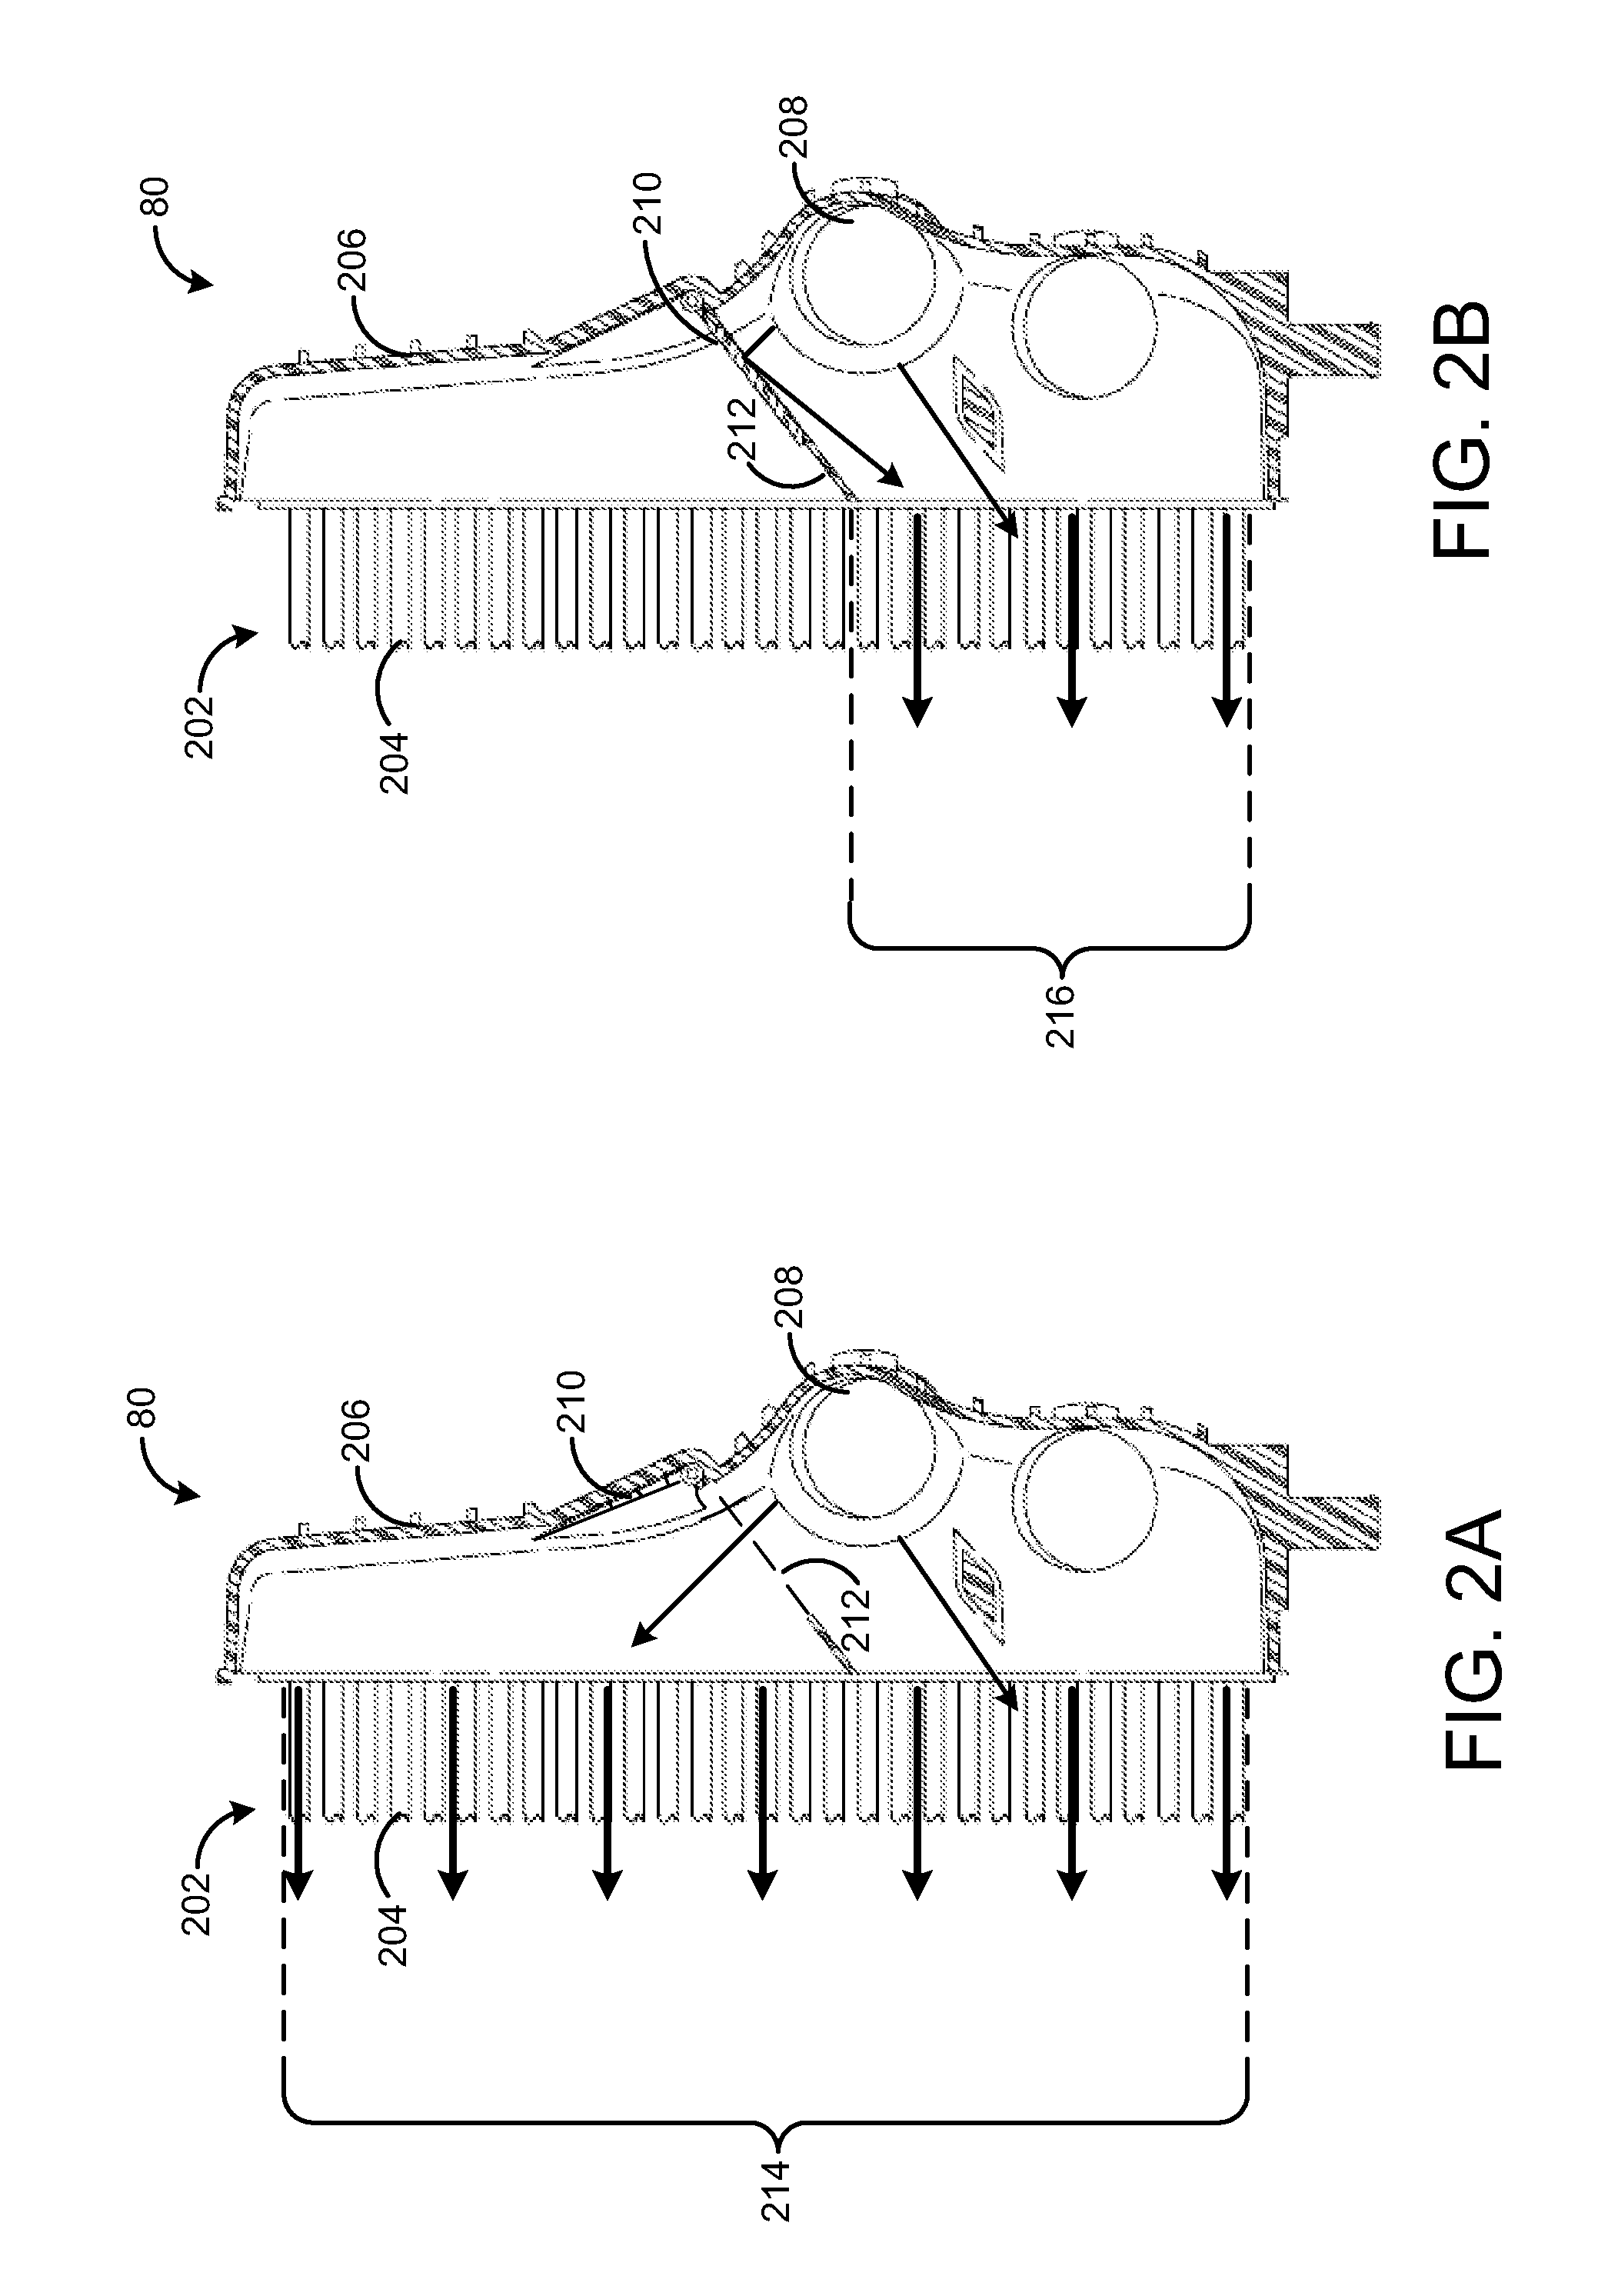 Method for controlling a variable charge air cooler